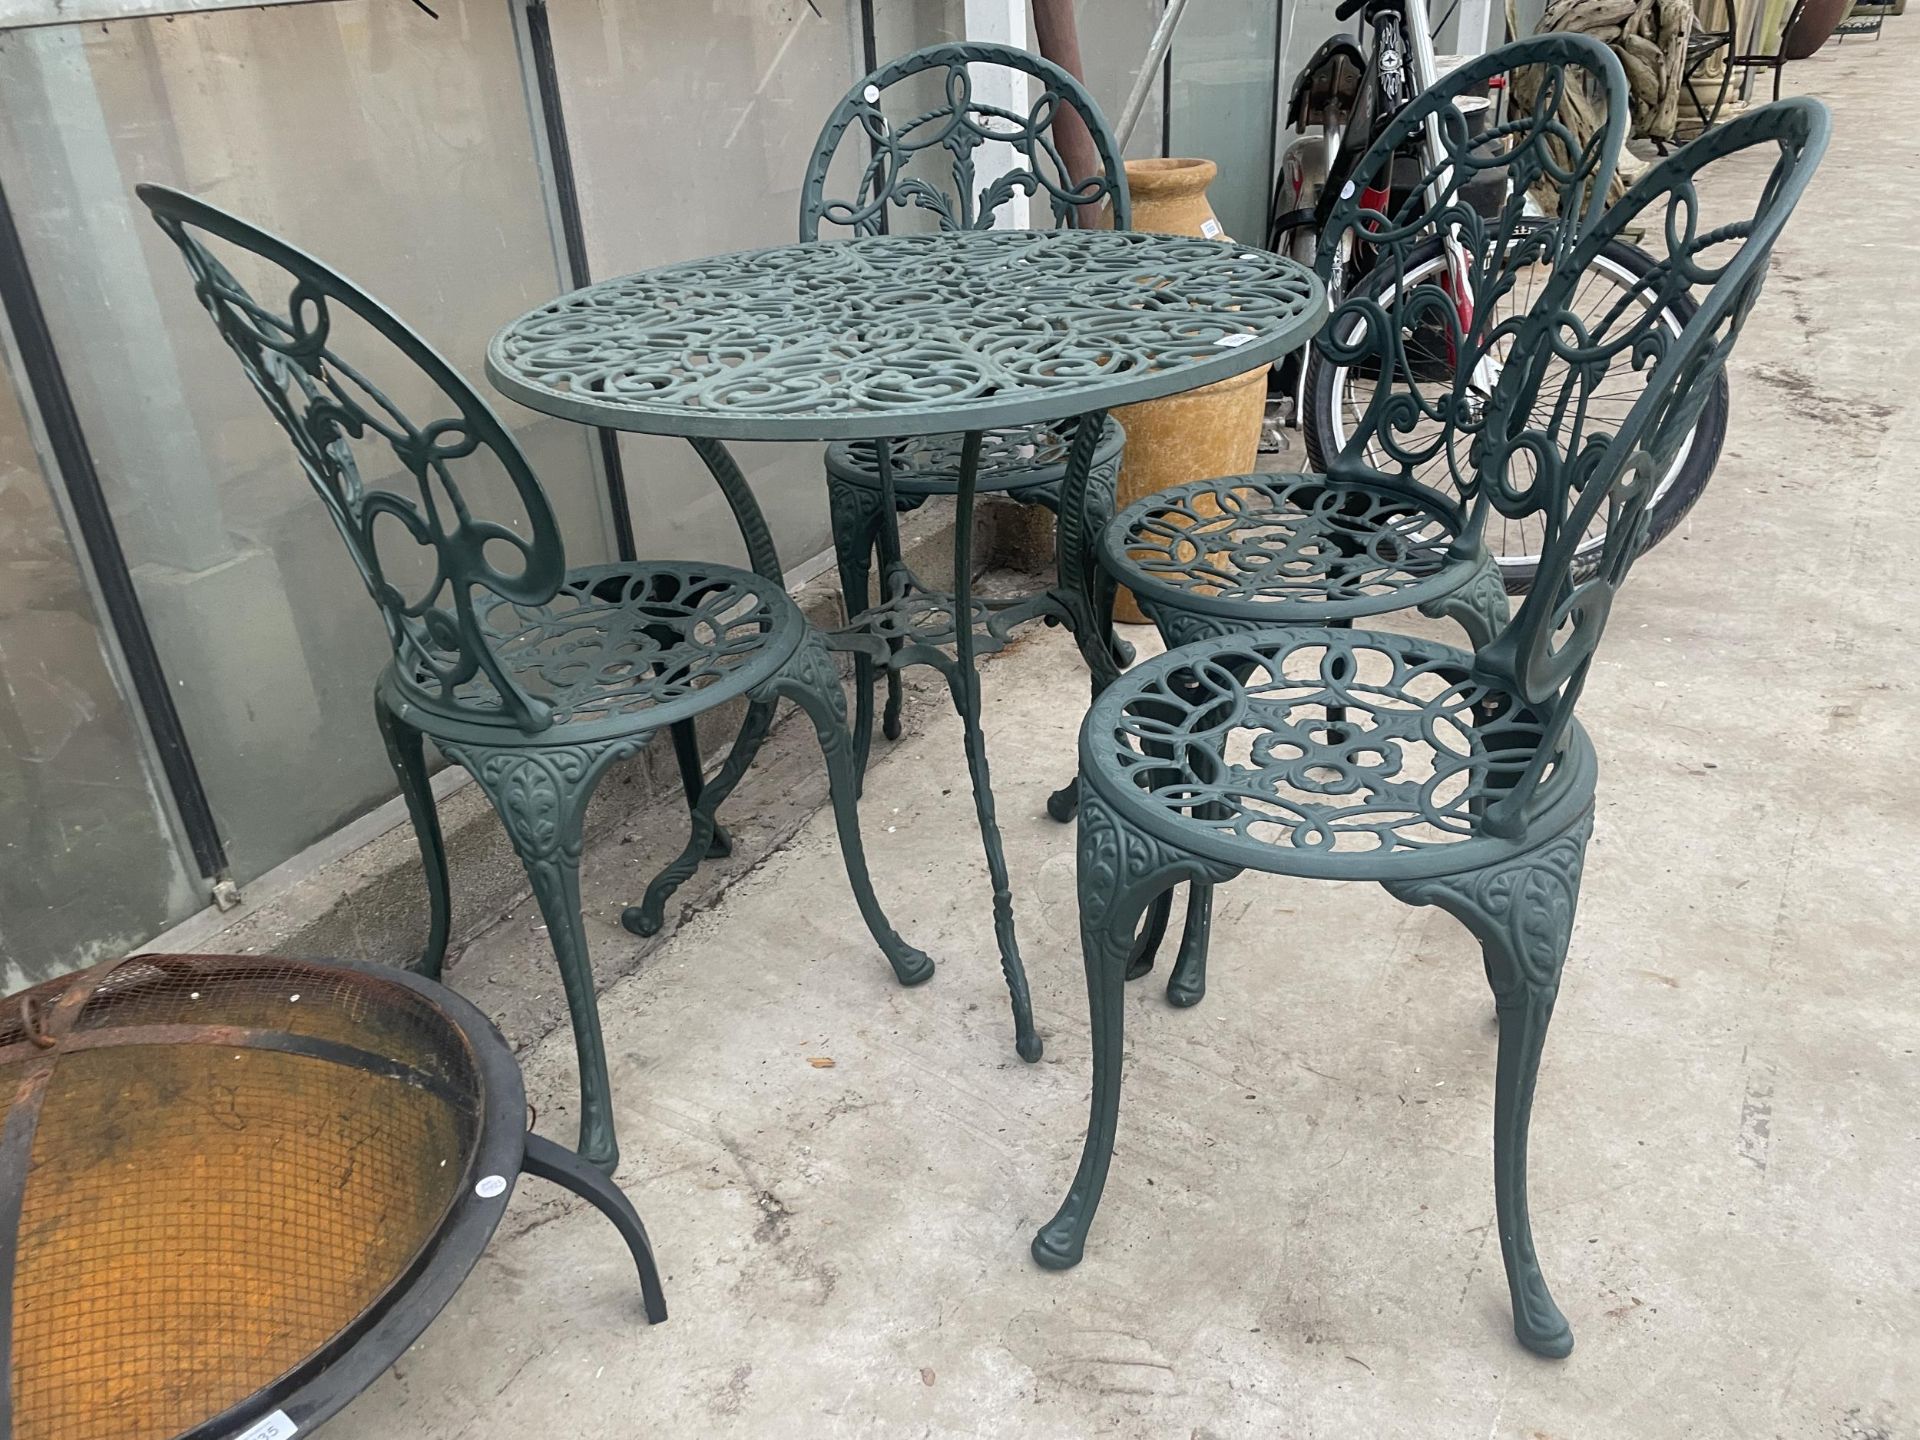 A VINTAGE STYLE GARDEN BISTRO SET COMPRISING OF A ROUND TABLE AND FOUR CHAIRS - Image 2 of 2